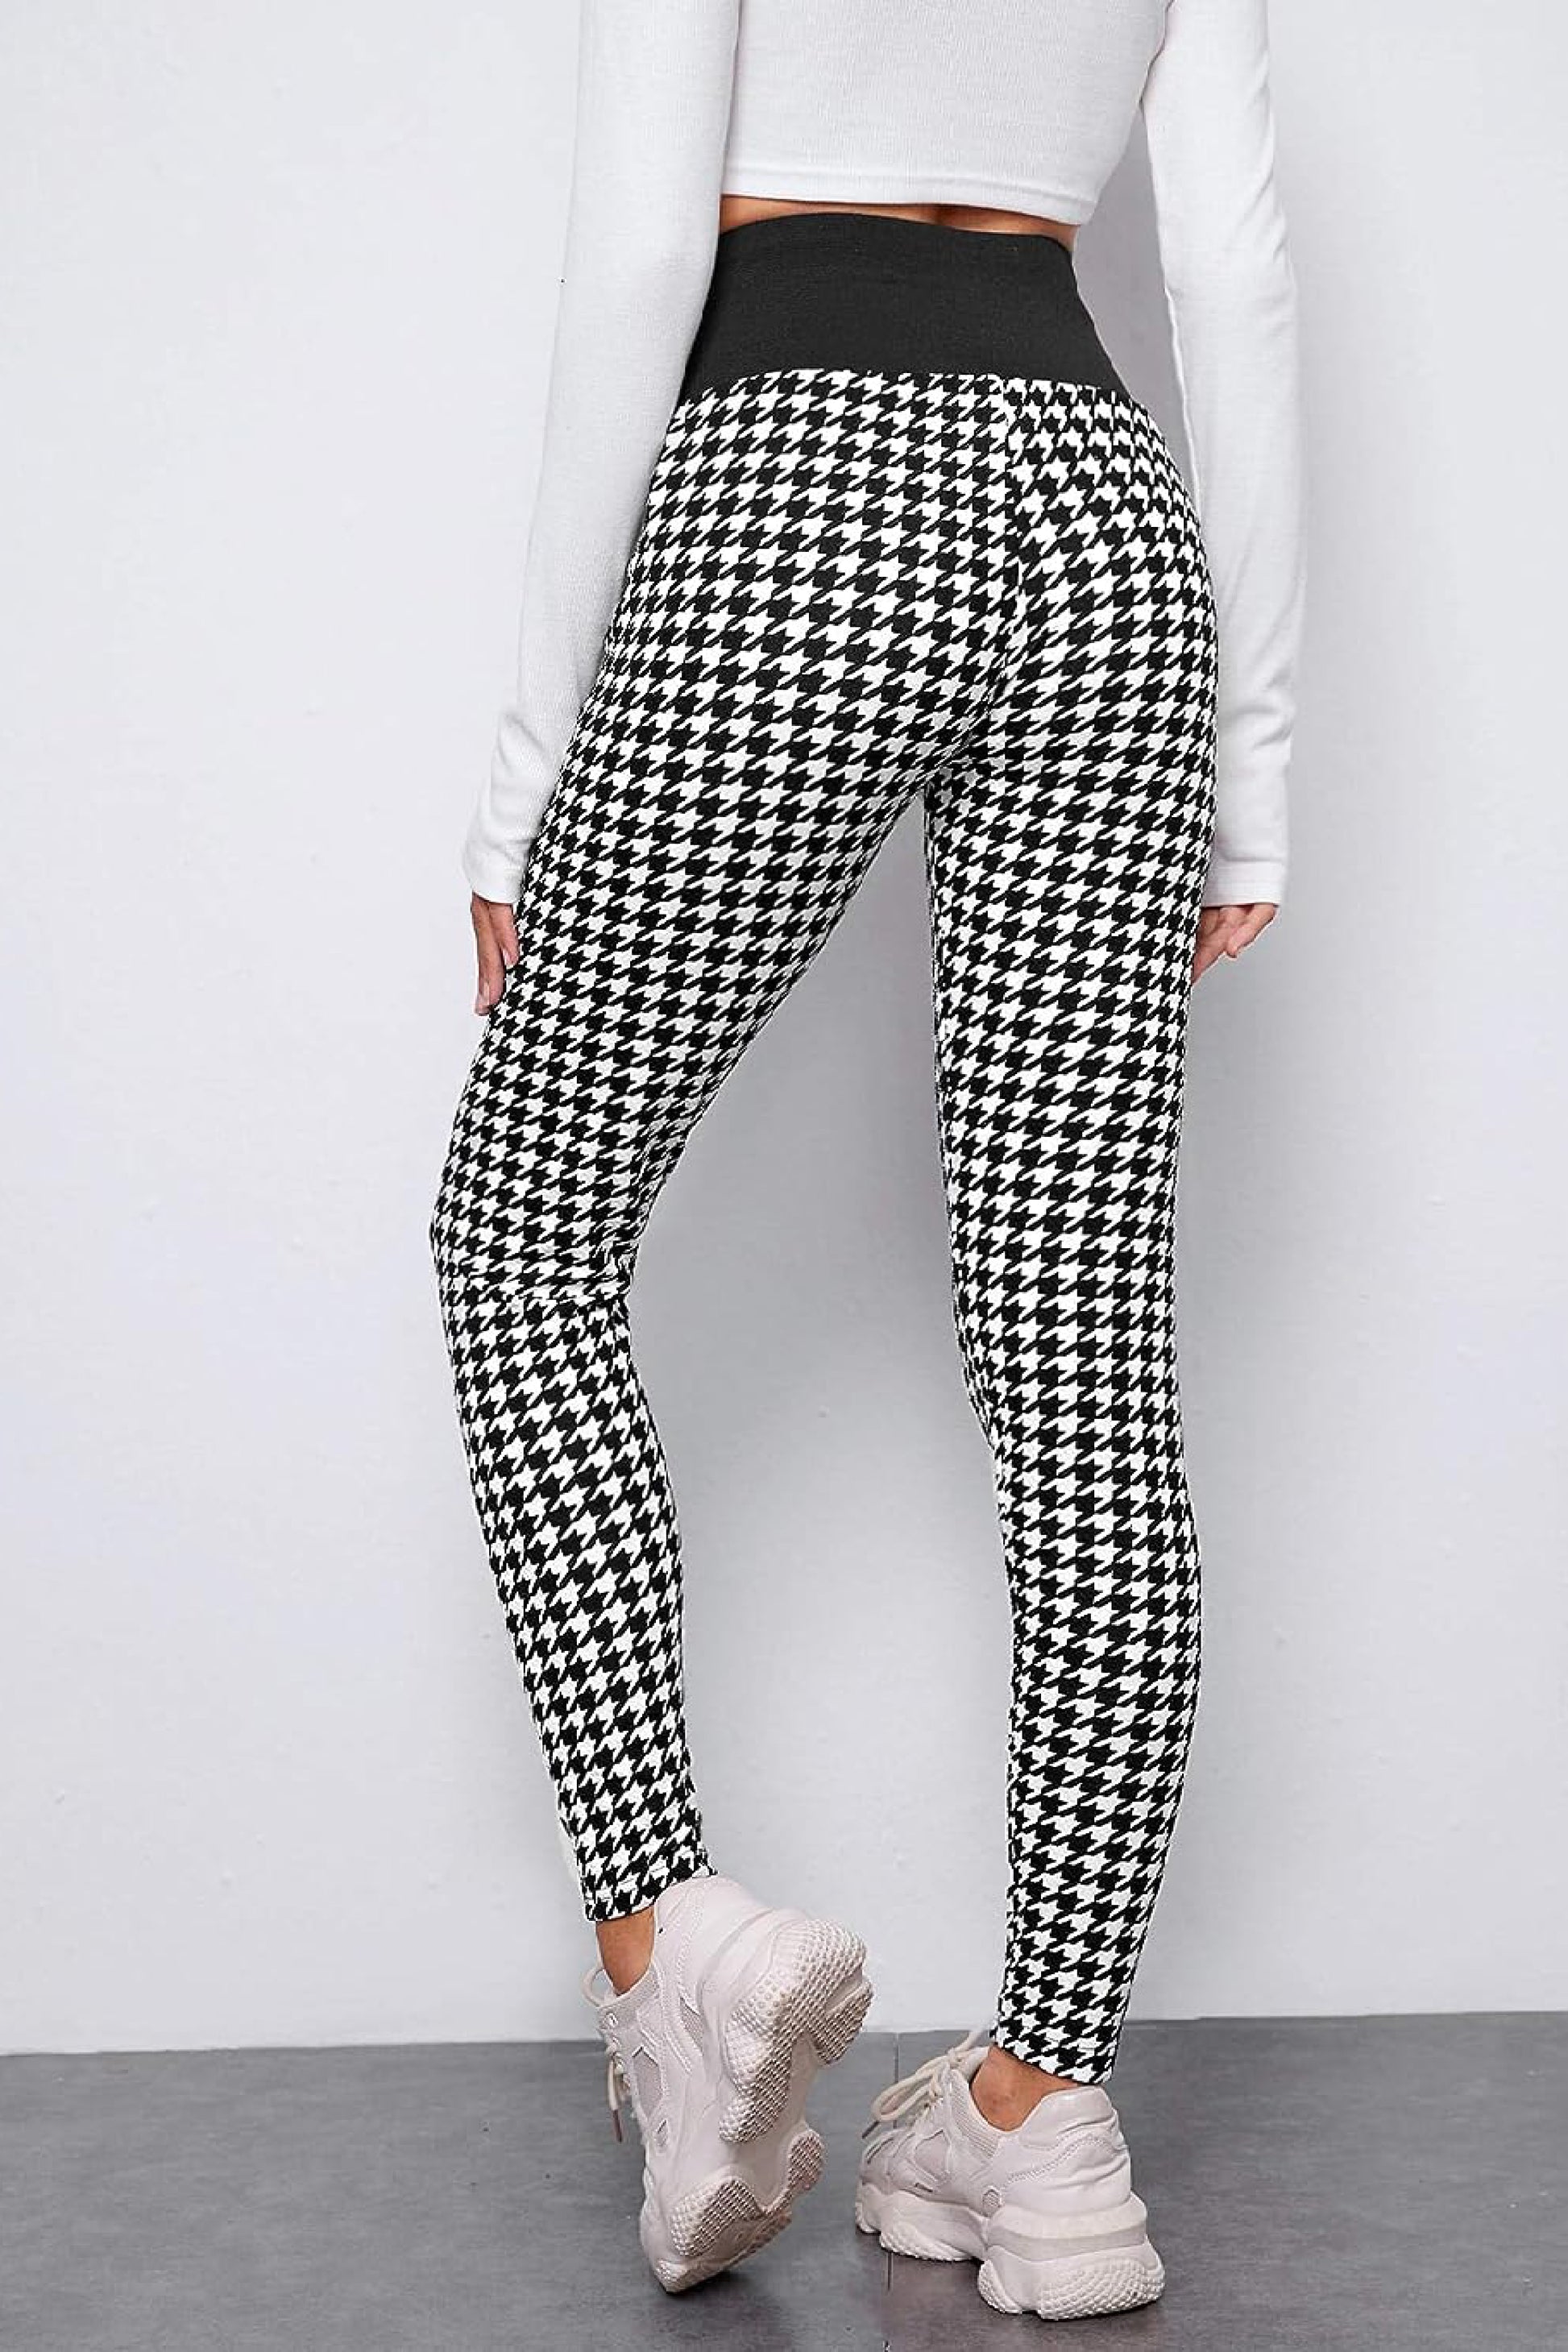 Black and white printed leggings for women available in the UAE